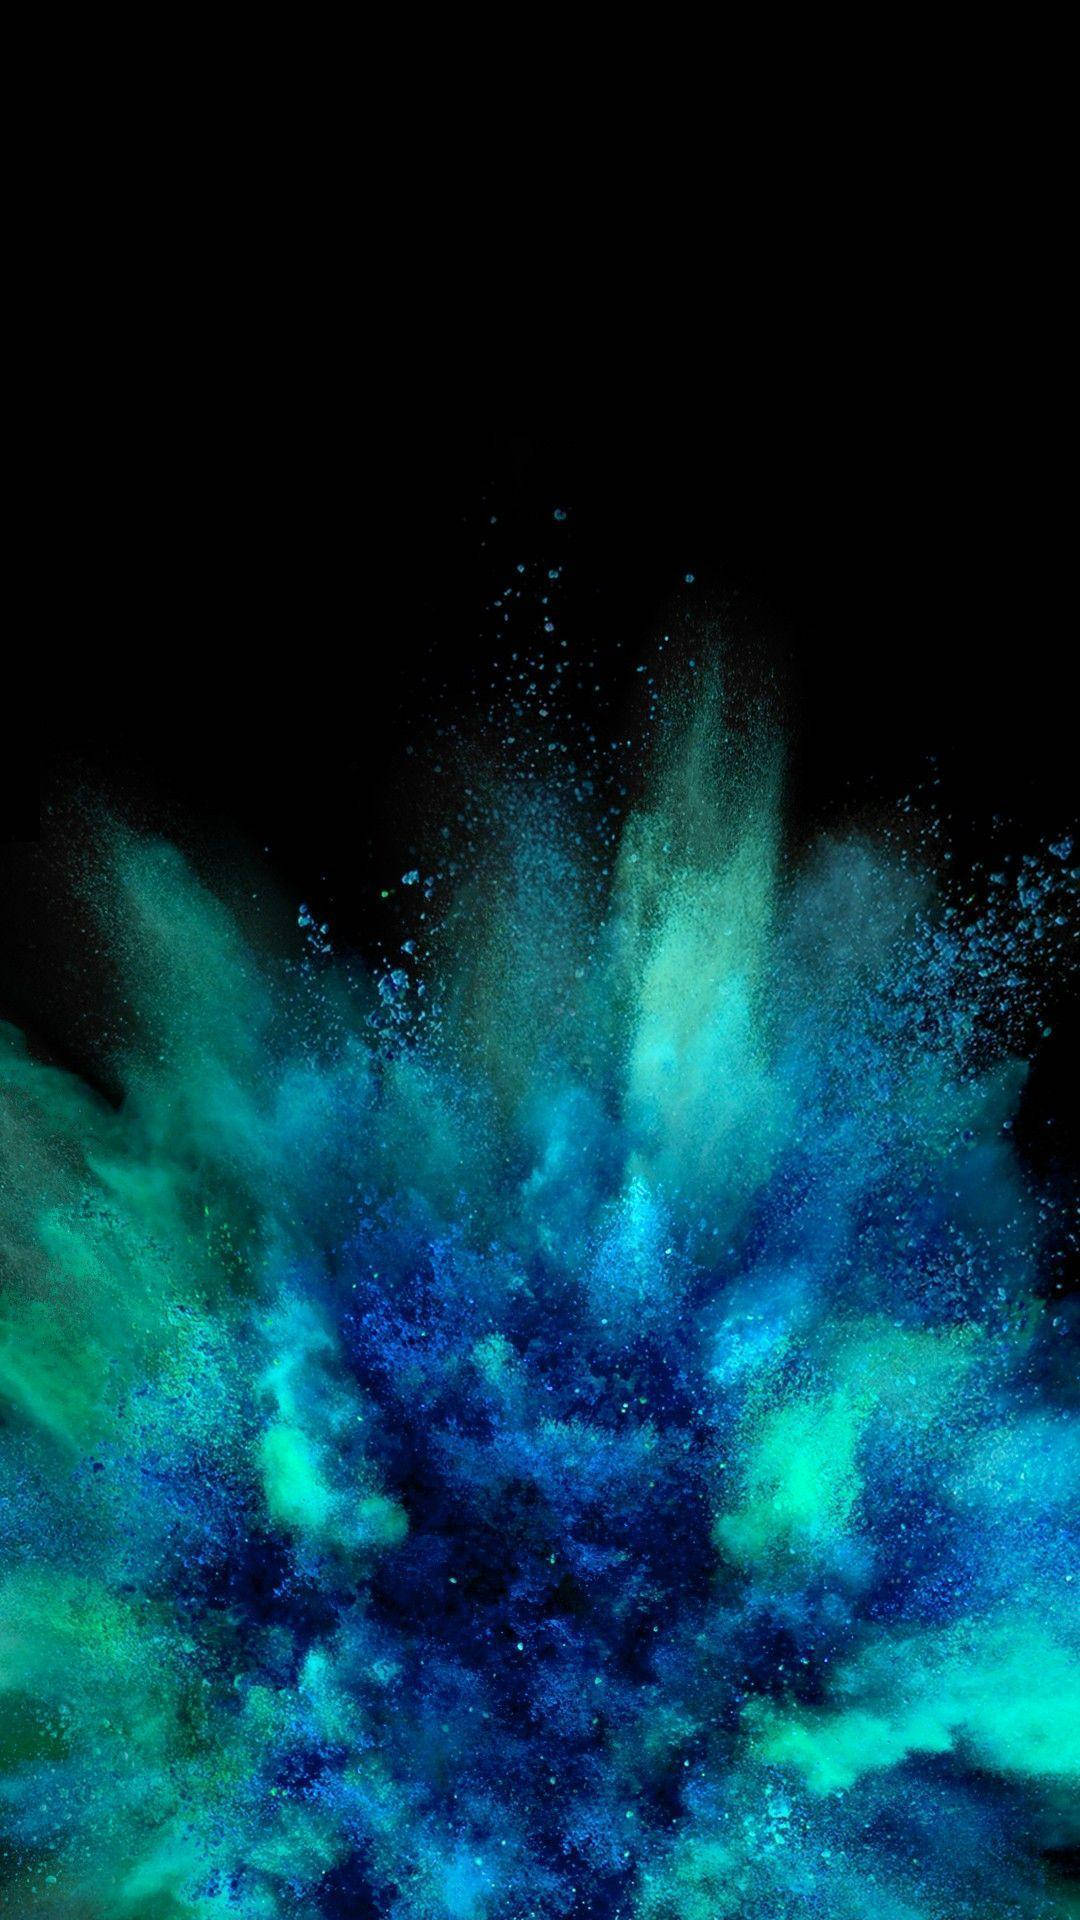 Enter a world of stunning blues with the Amoled Explosion of Blue Powders Wallpaper